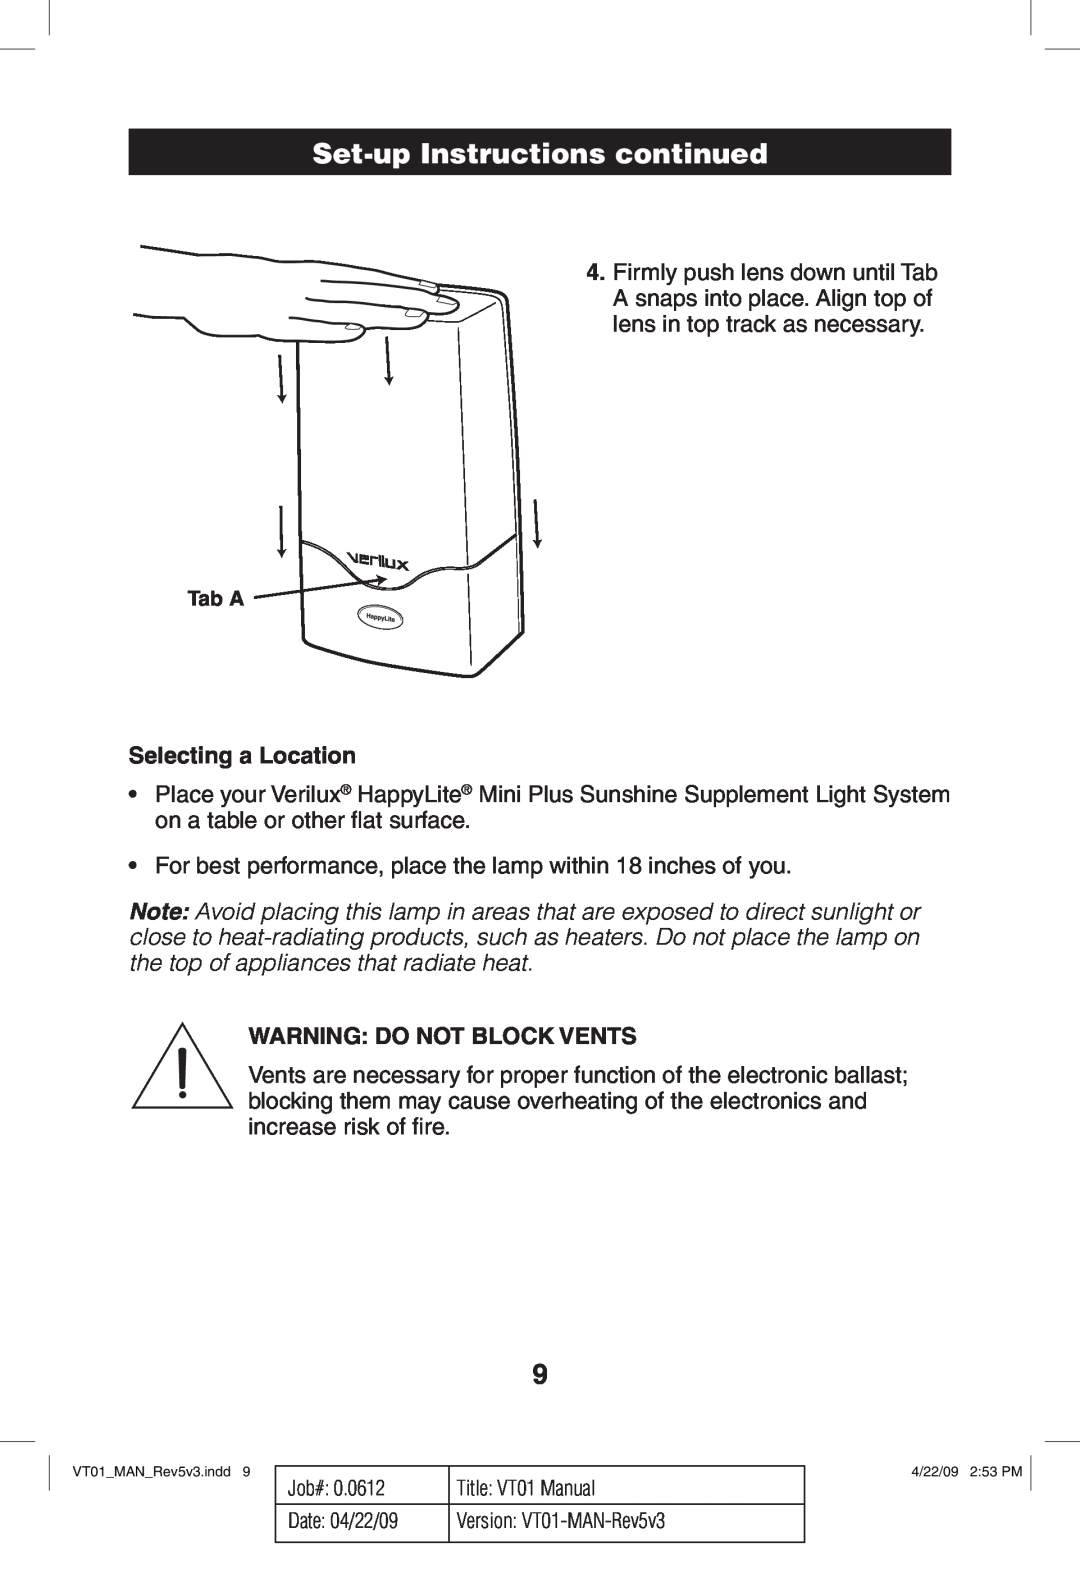 Verilux VT01 manual Set-upInstructions continued, Selecting a Location, Warning Do Not Block Vents, Tab A 